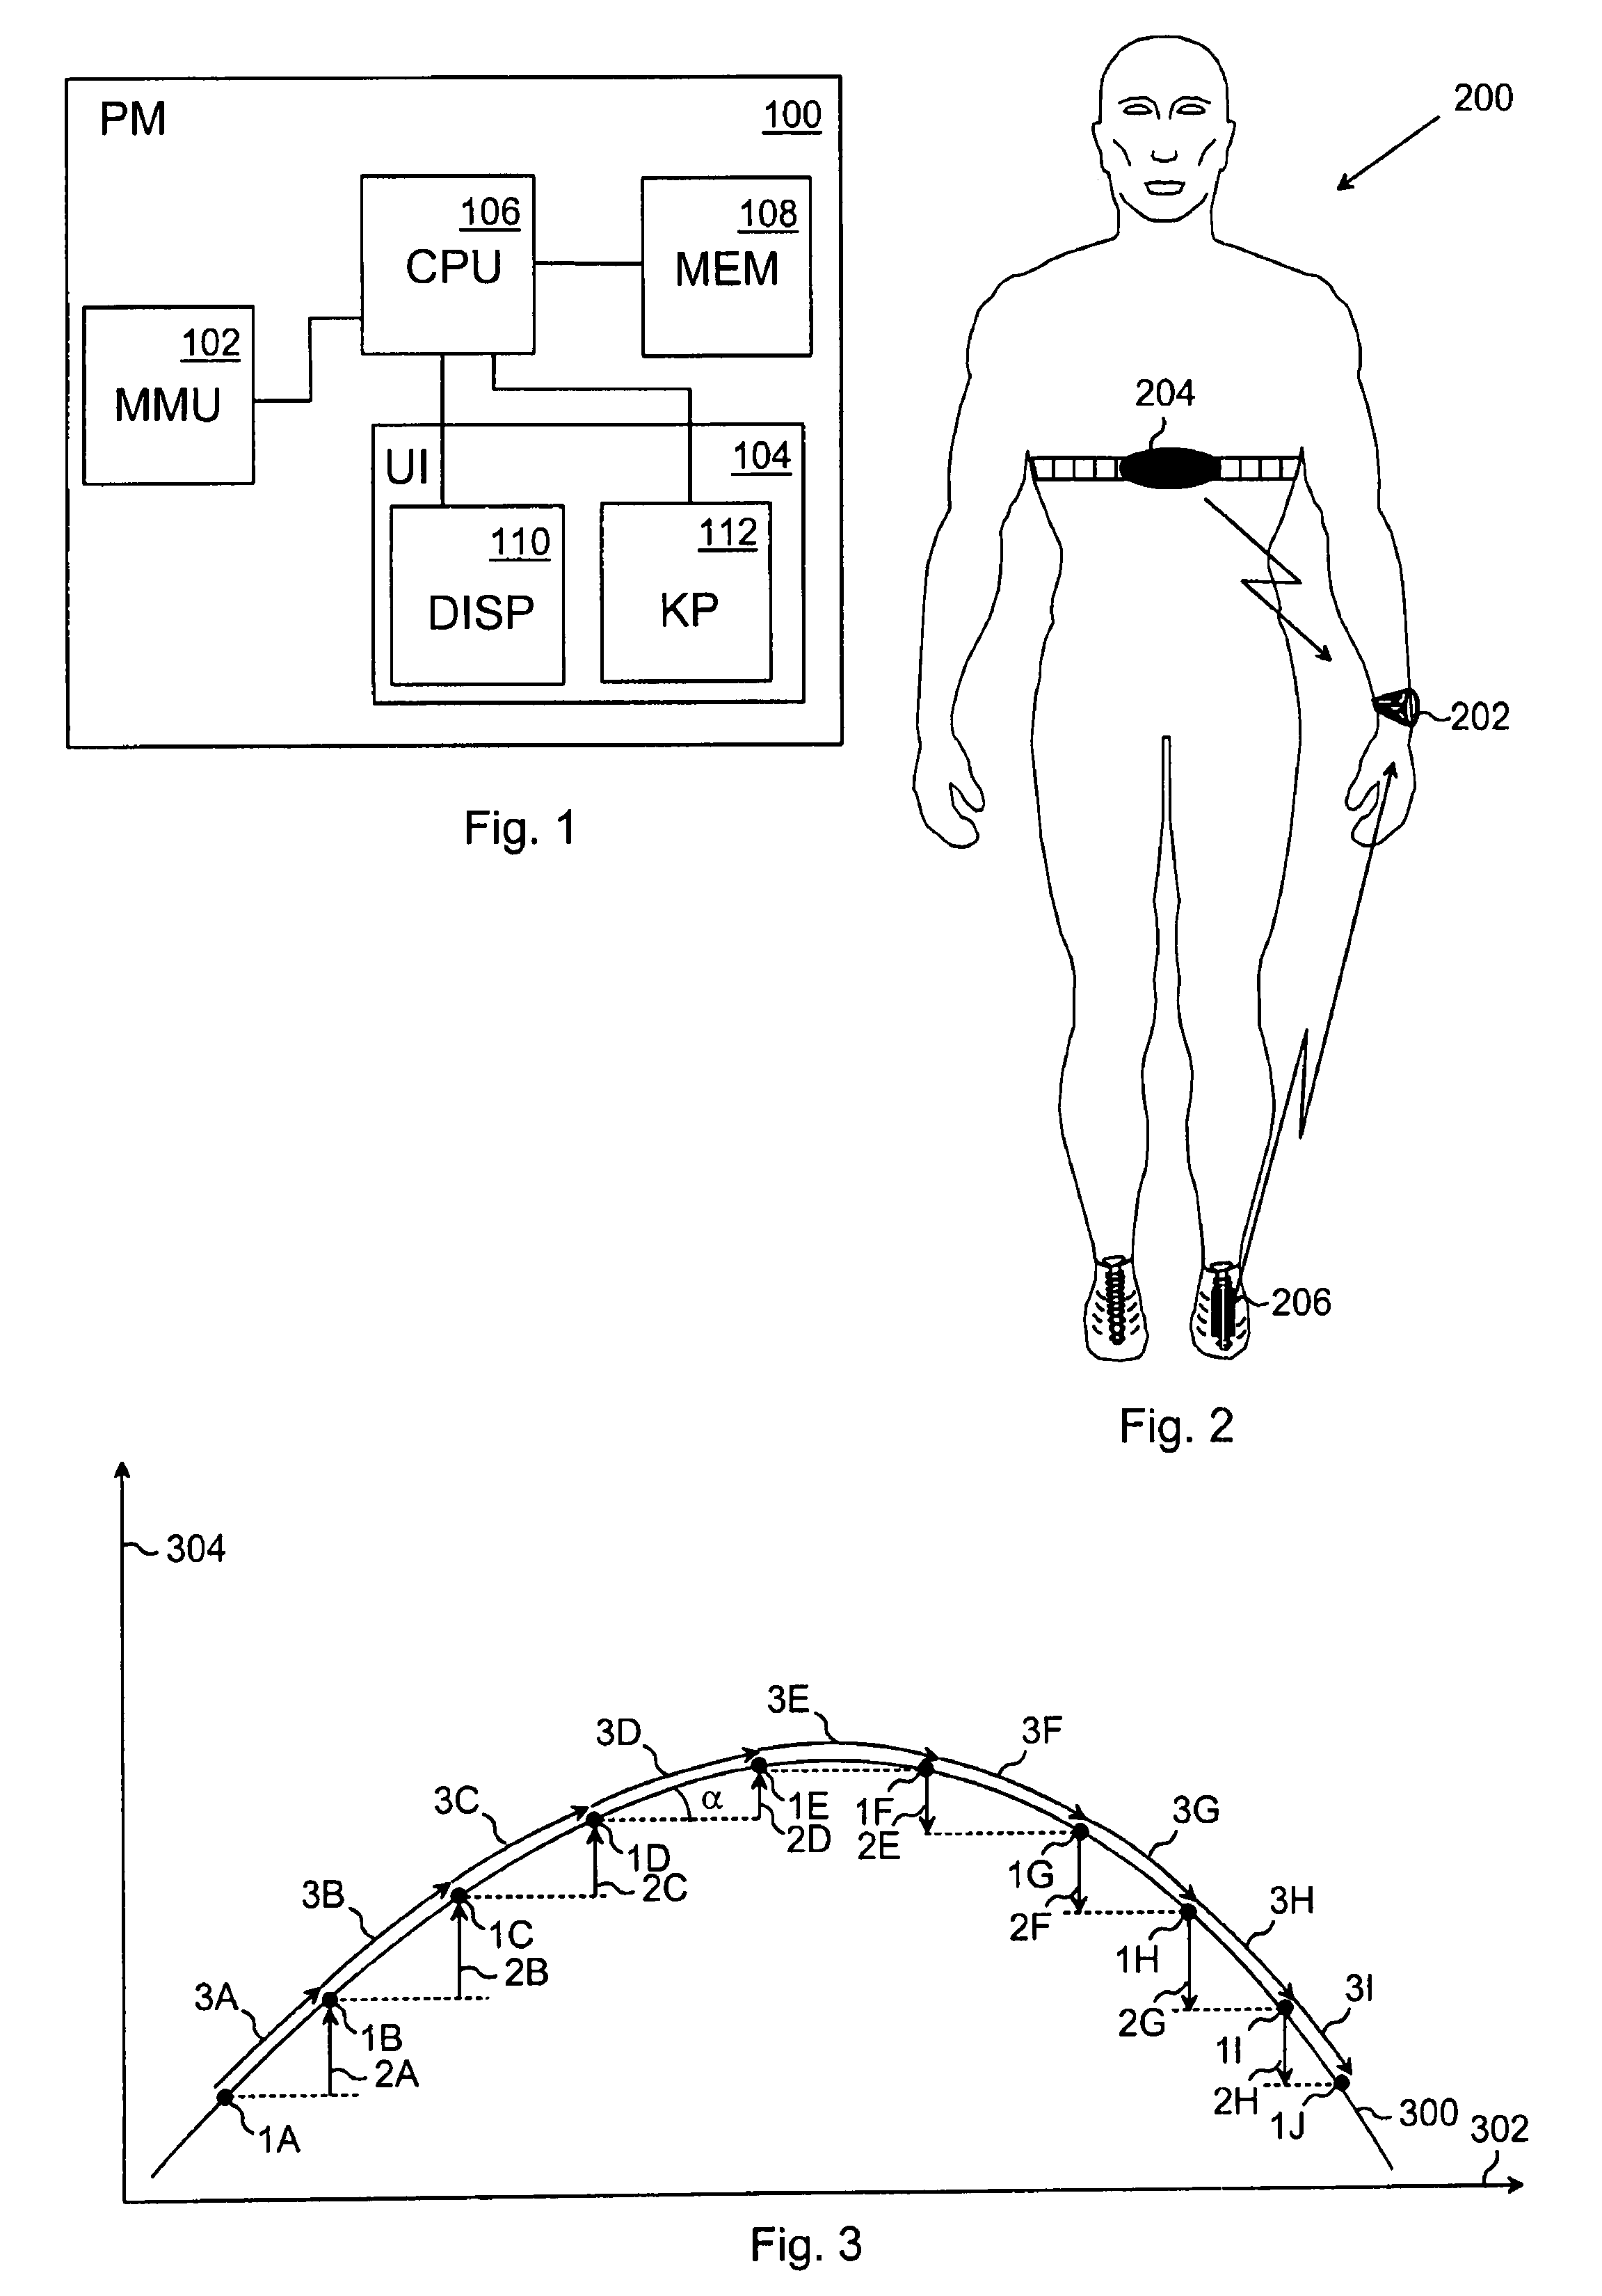 User-specific performance monitor, method, and computer software product